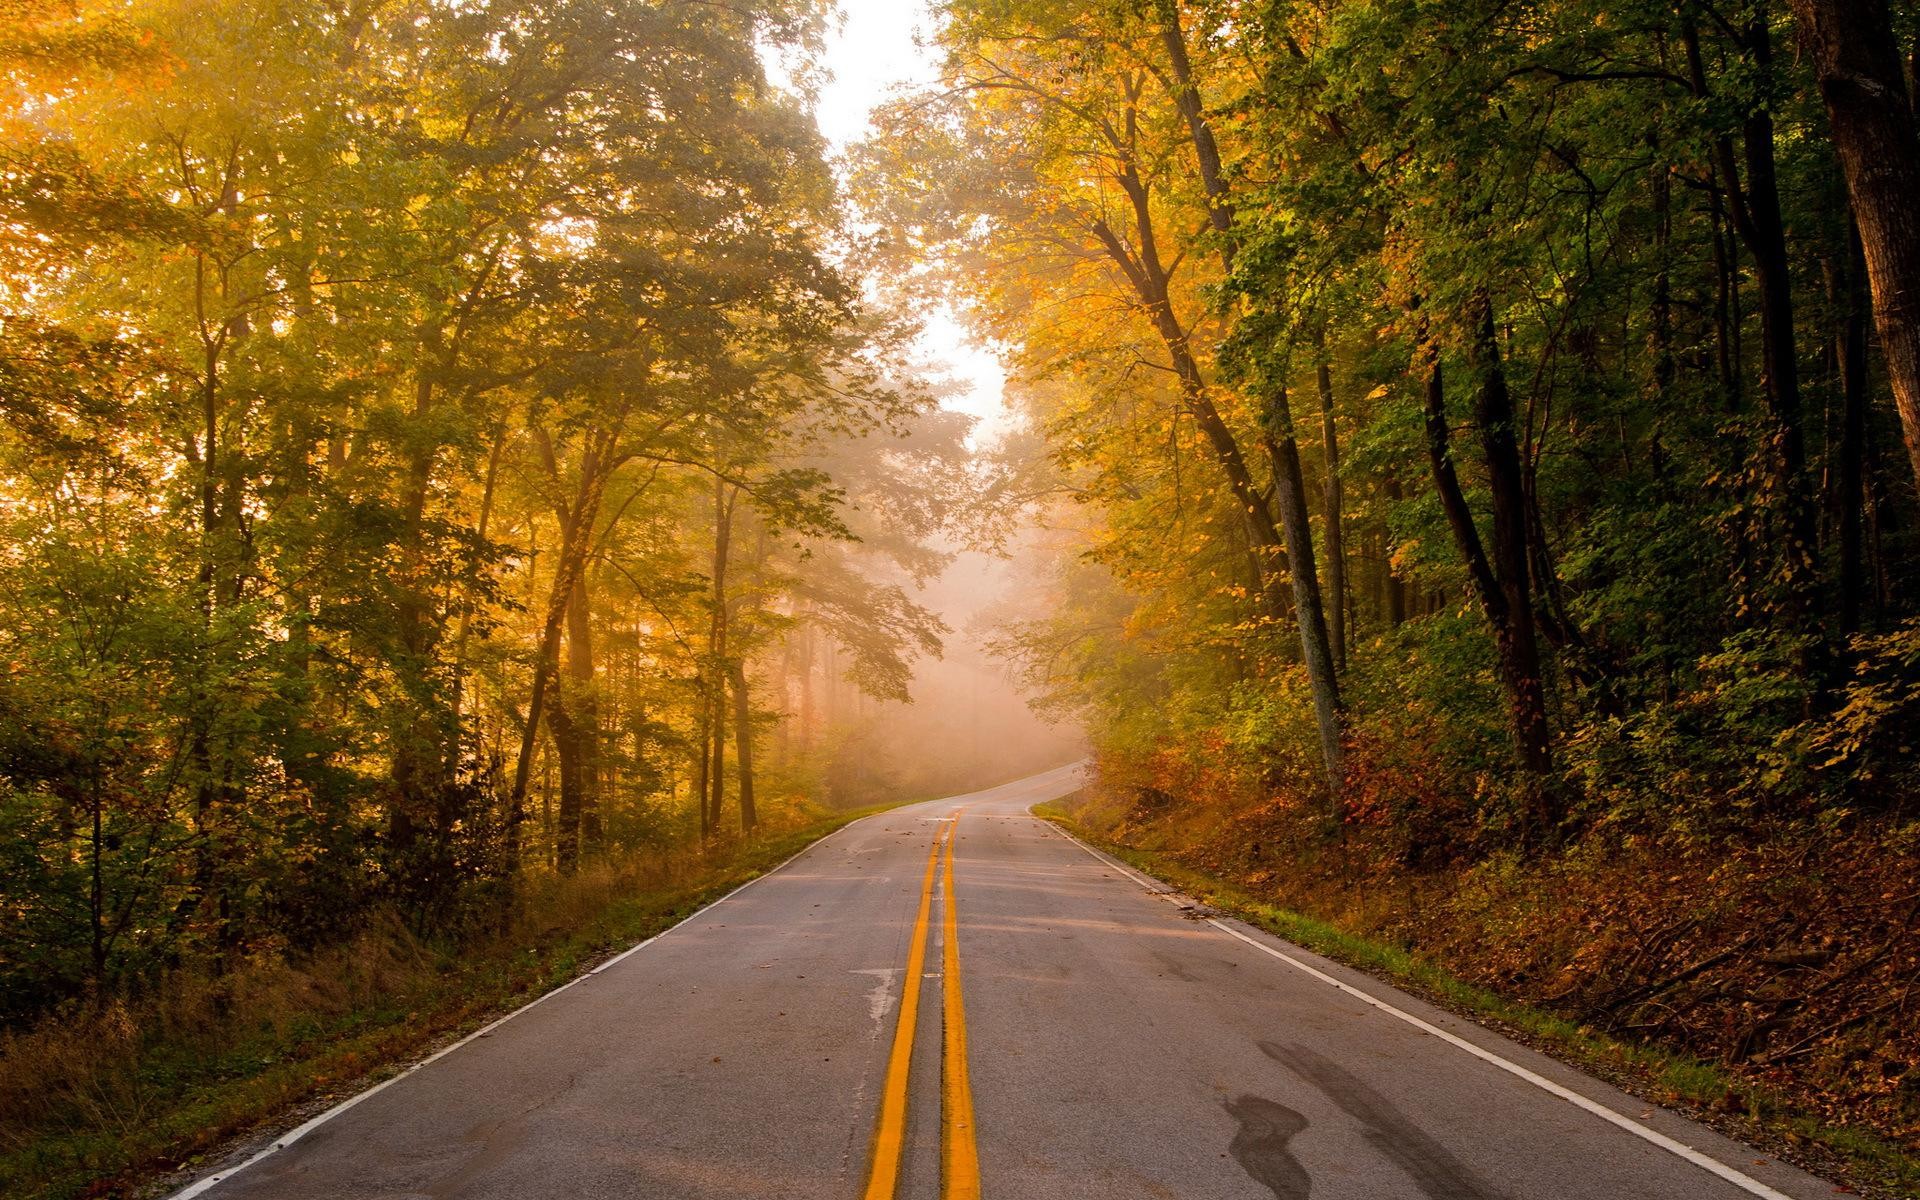 1920x1200 Related HD wallpapers of "Autumn Road Trip"